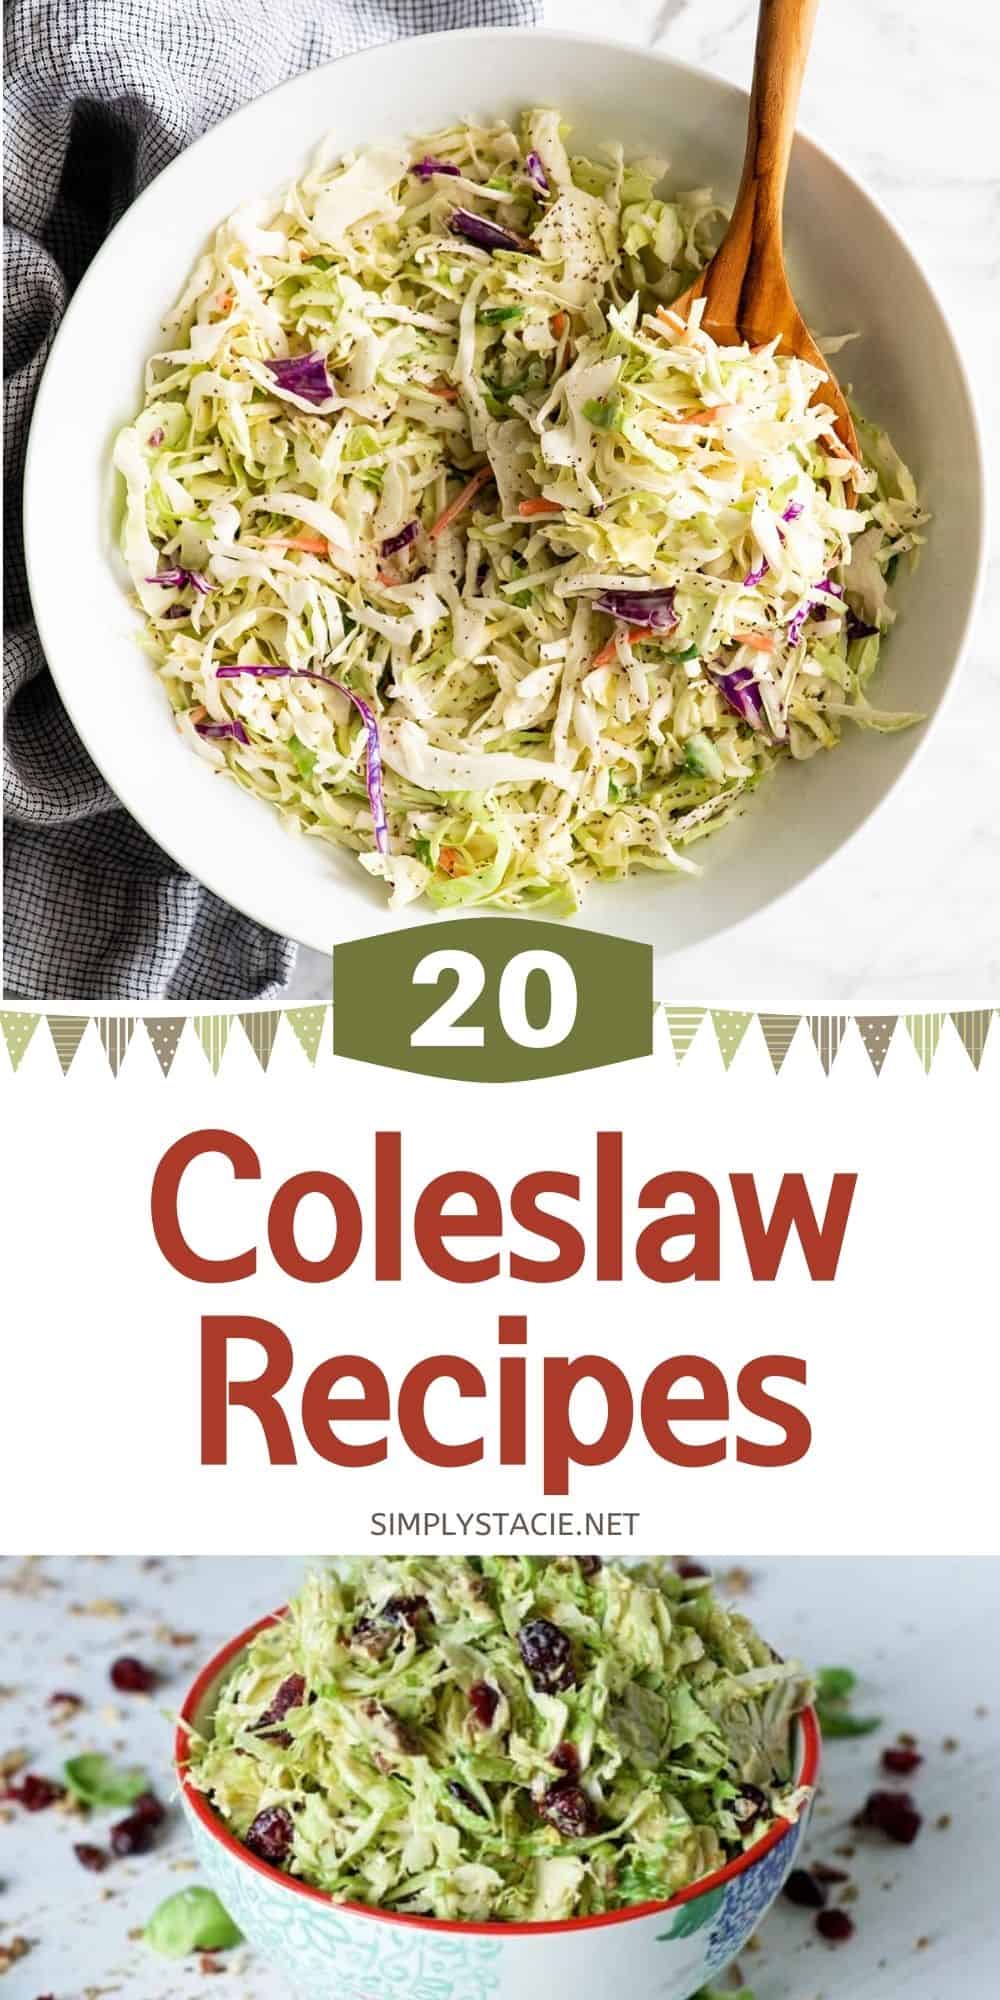 20 Coleslaw Recipes to Make This Summer - Serve up some deliciousness at your next BBQ or picnic!